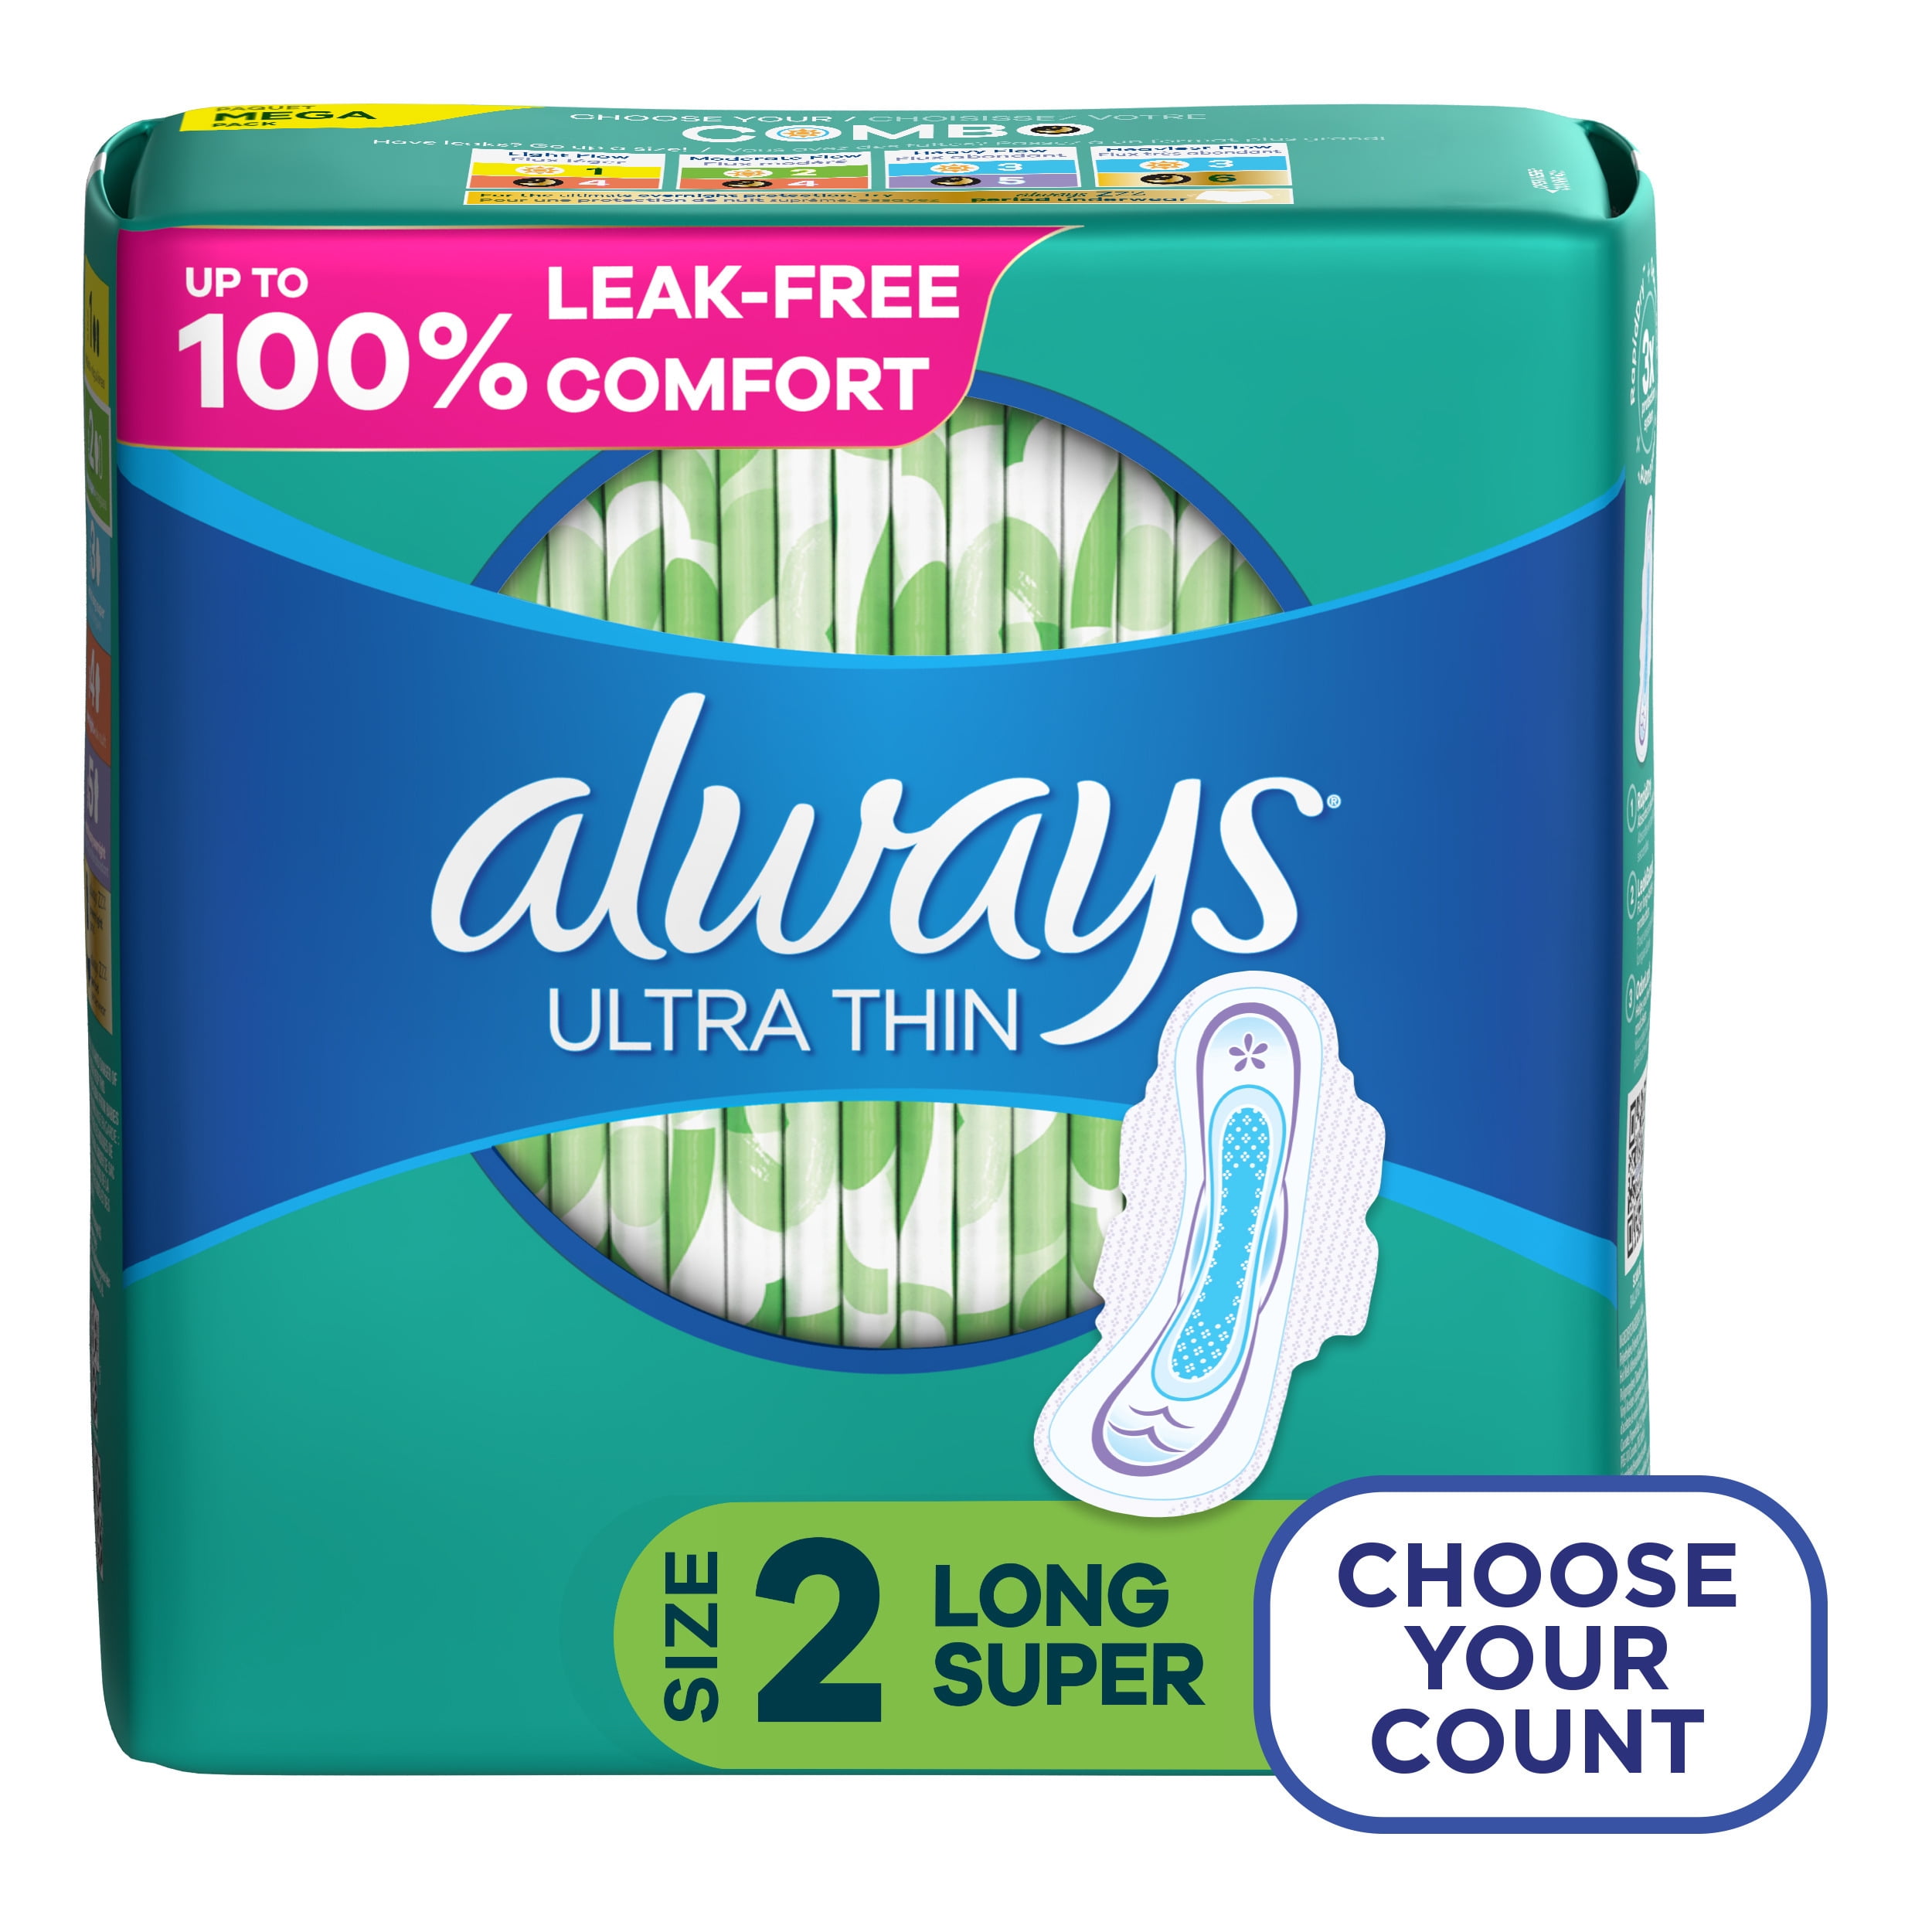 Always Ultra Thin Pads with Wings, Size 2, Long Super Absorbency, 58 CT - image 1 of 9